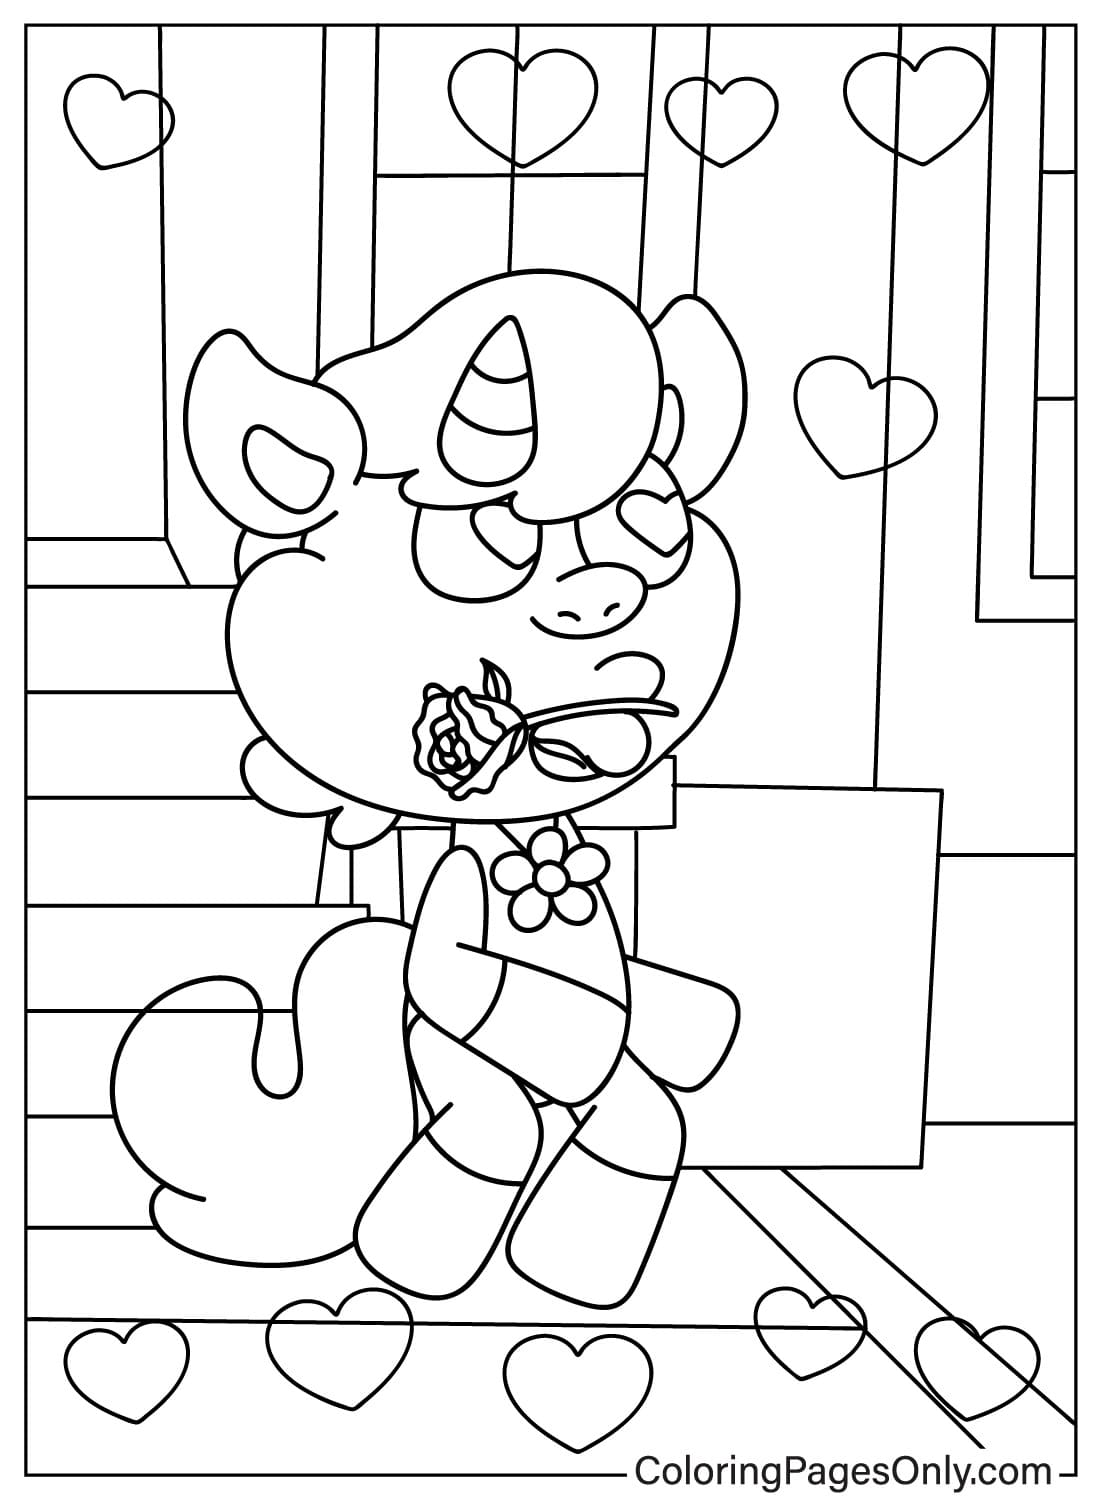 Pictures CraftyCorn Coloring Page from CraftyCorn